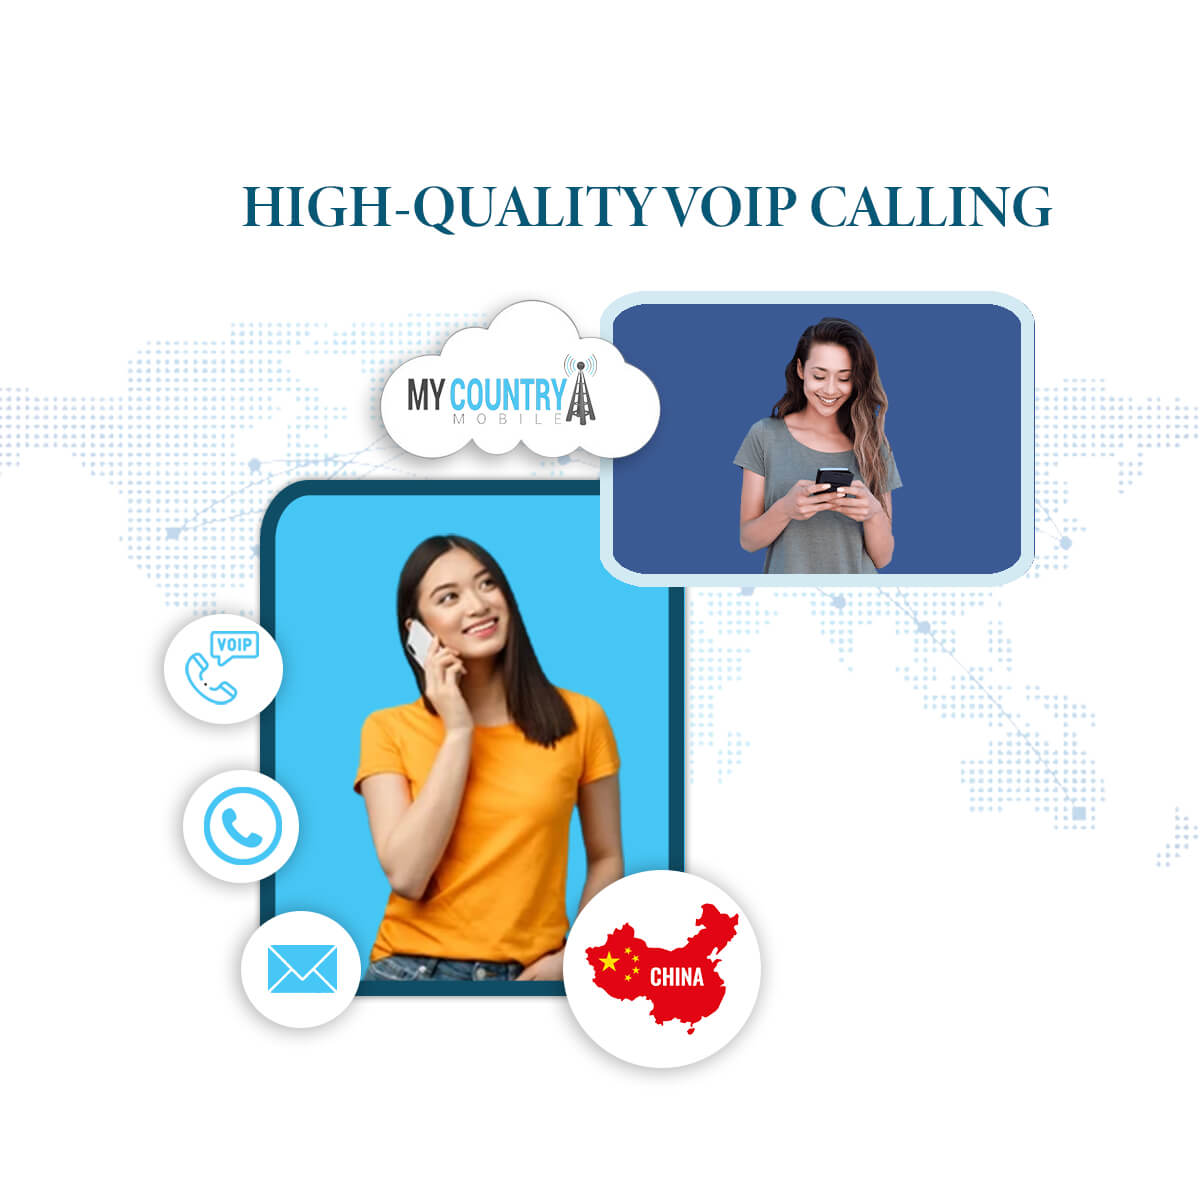 HIGH-QUALITY-VOIP-CALLING-IN-CHINA- (1)